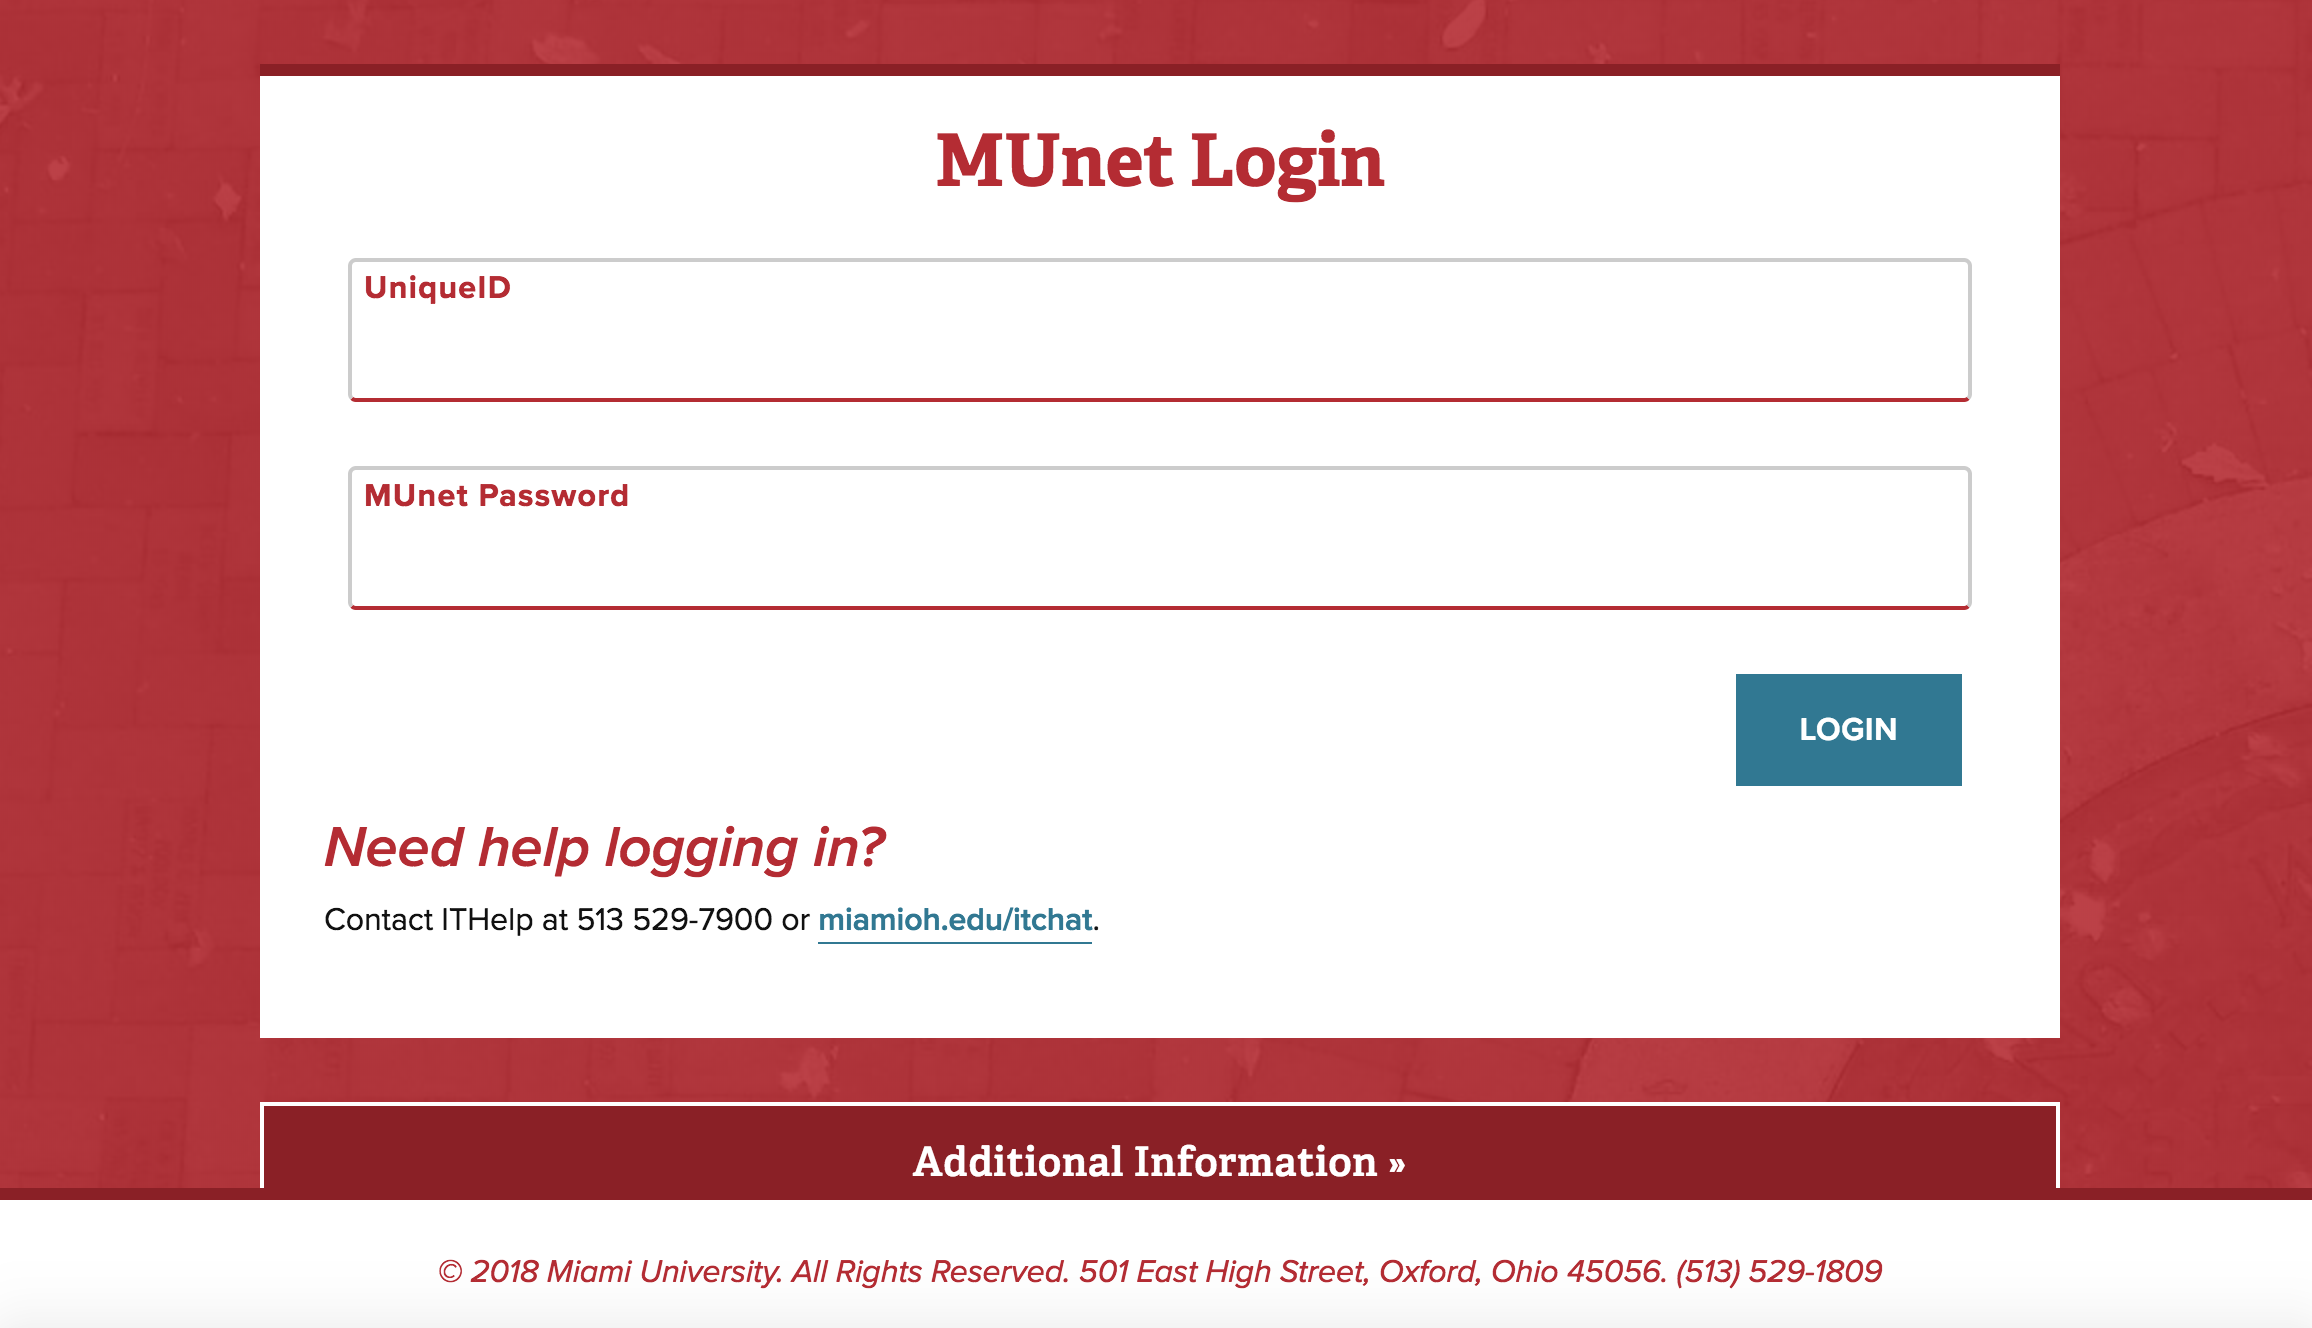 login prompts for username and password on a red background